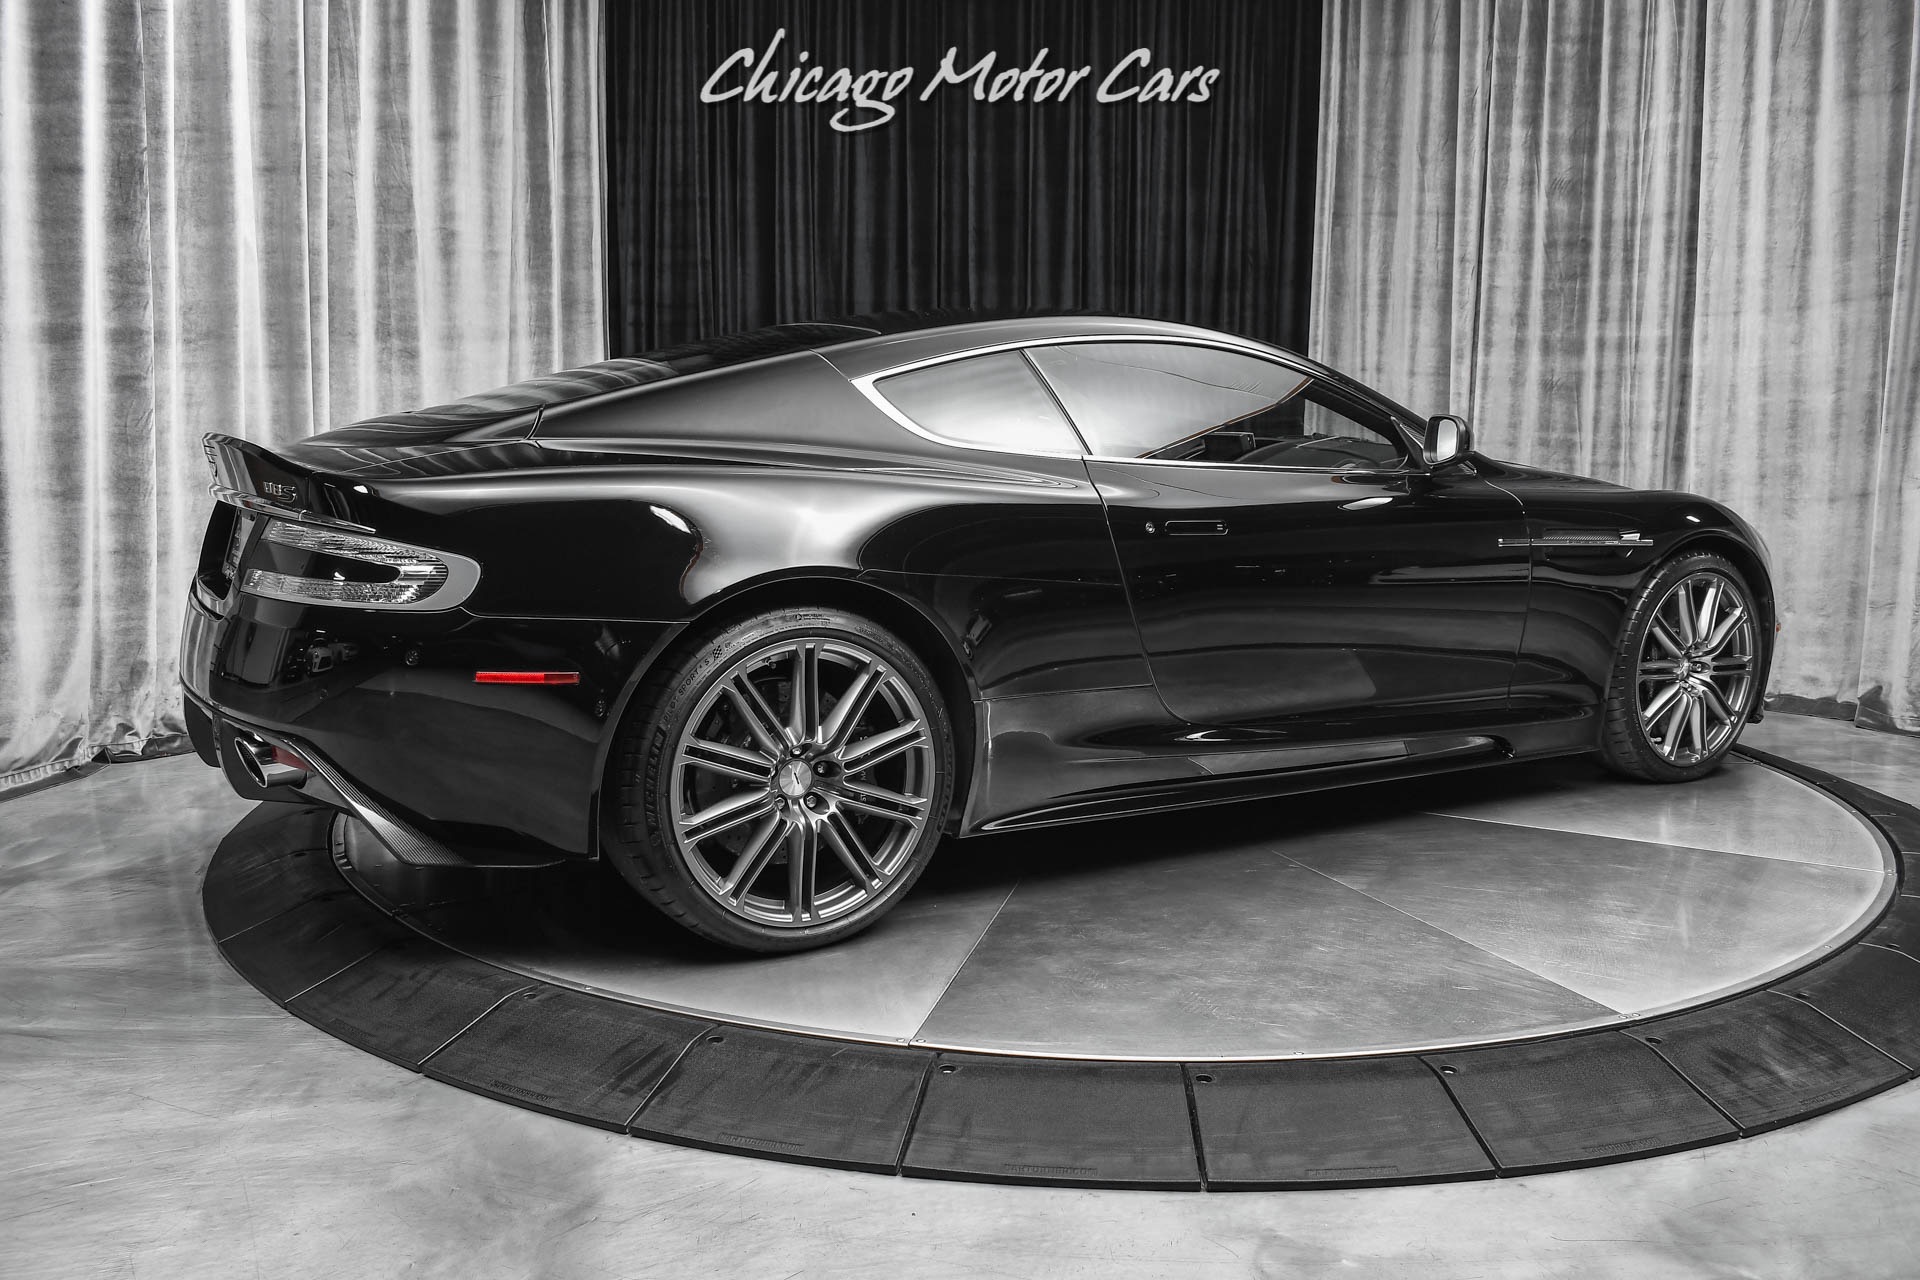 Used-2009-Aston-Martin-DBS-Coupe-6-Speed-Manual-Only-15k-Miles-RARE-Example-Serviced